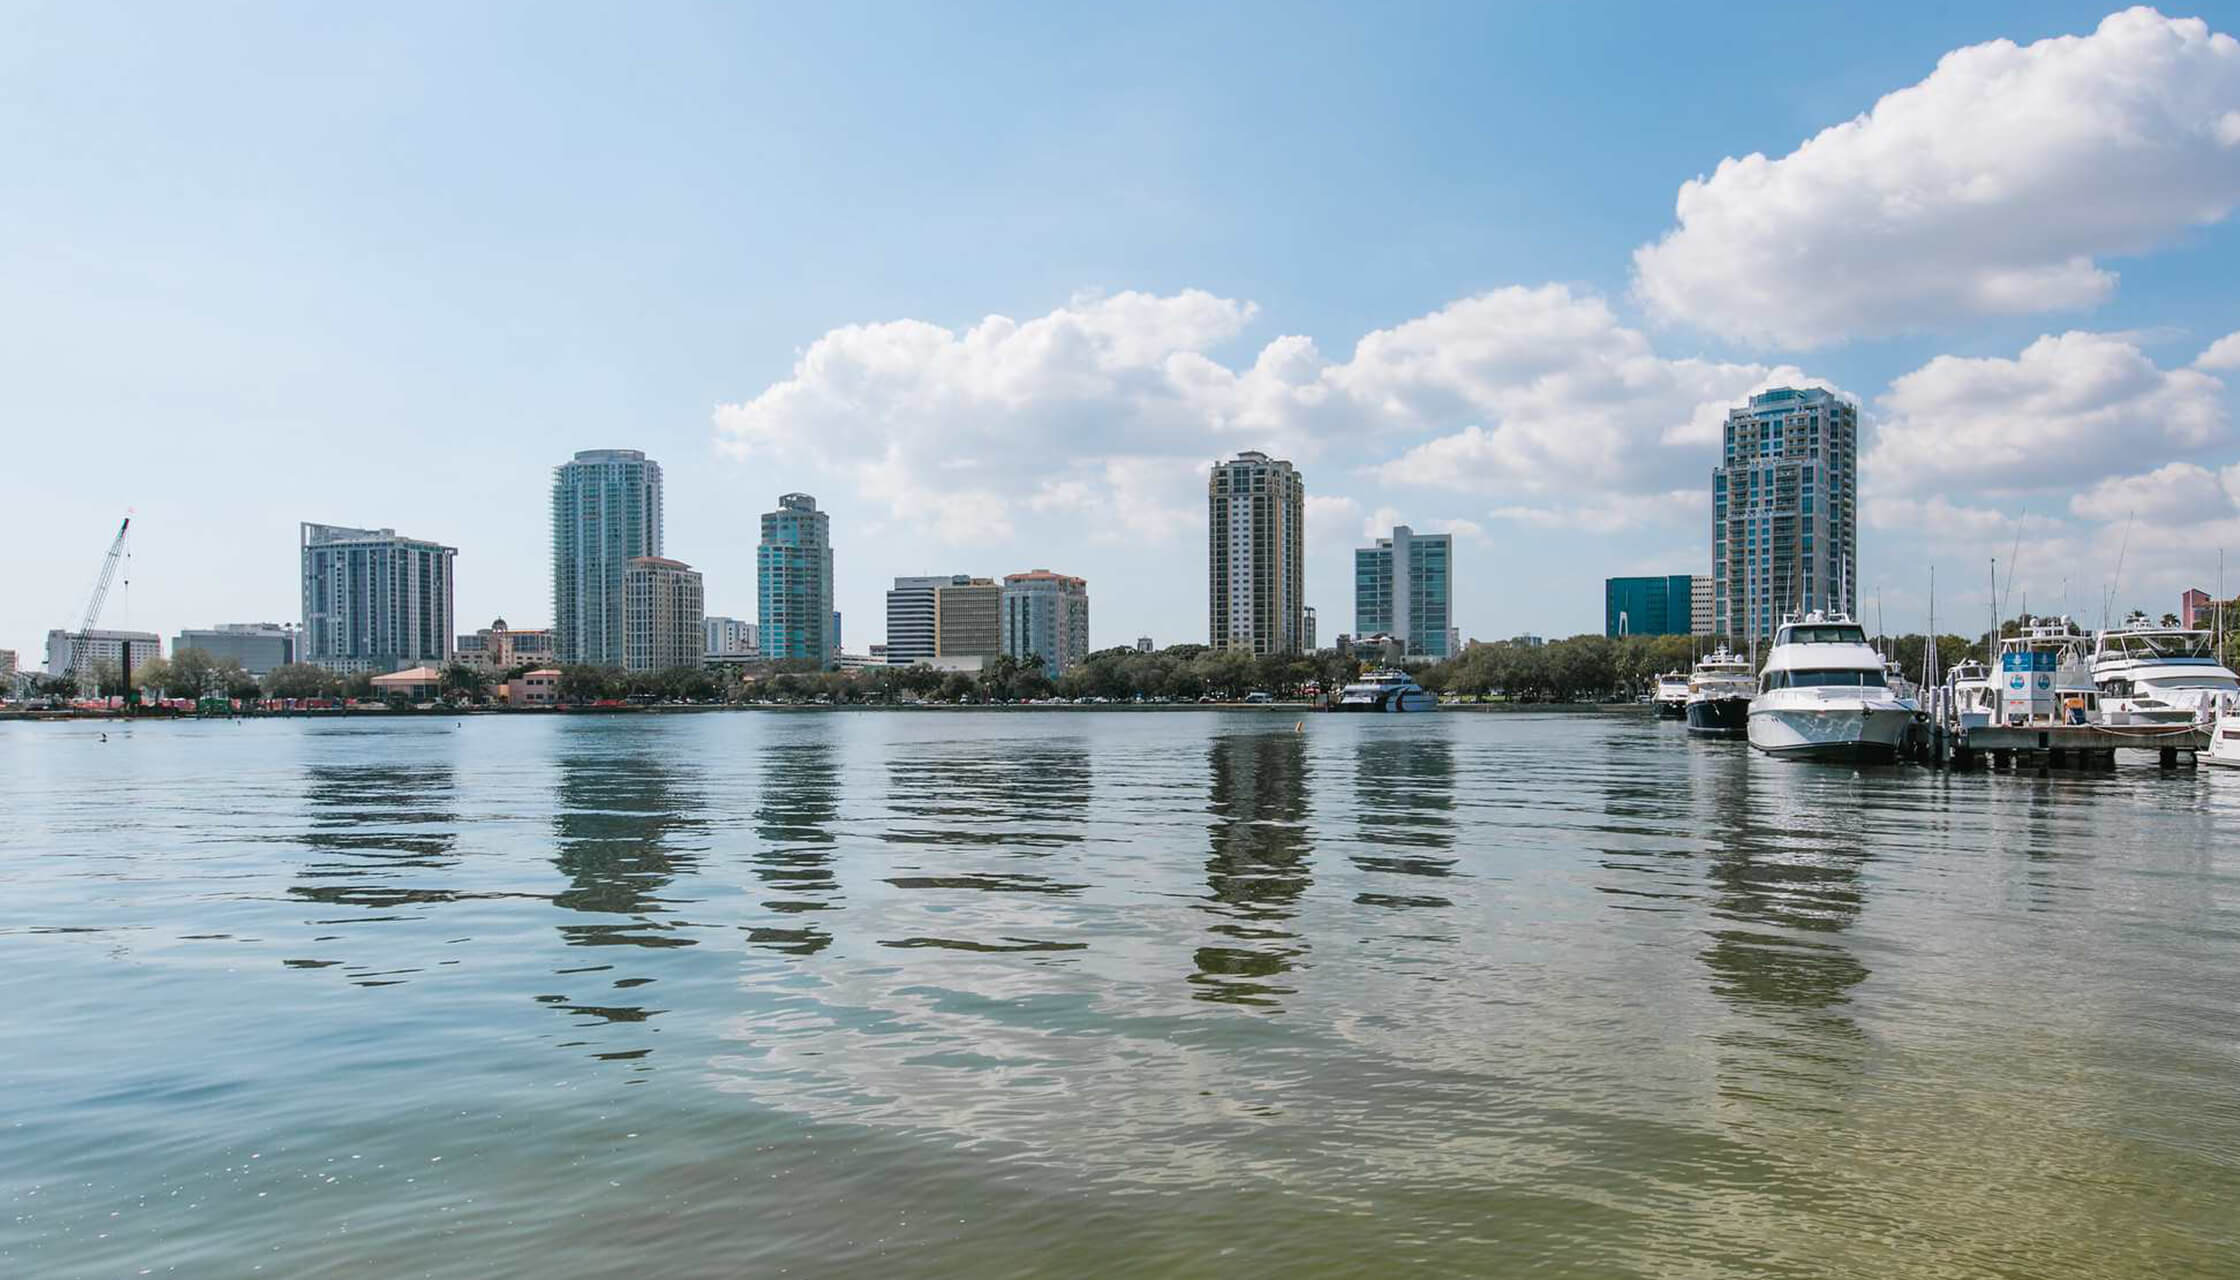 St. Pete ranks #2 in best places to own a home!